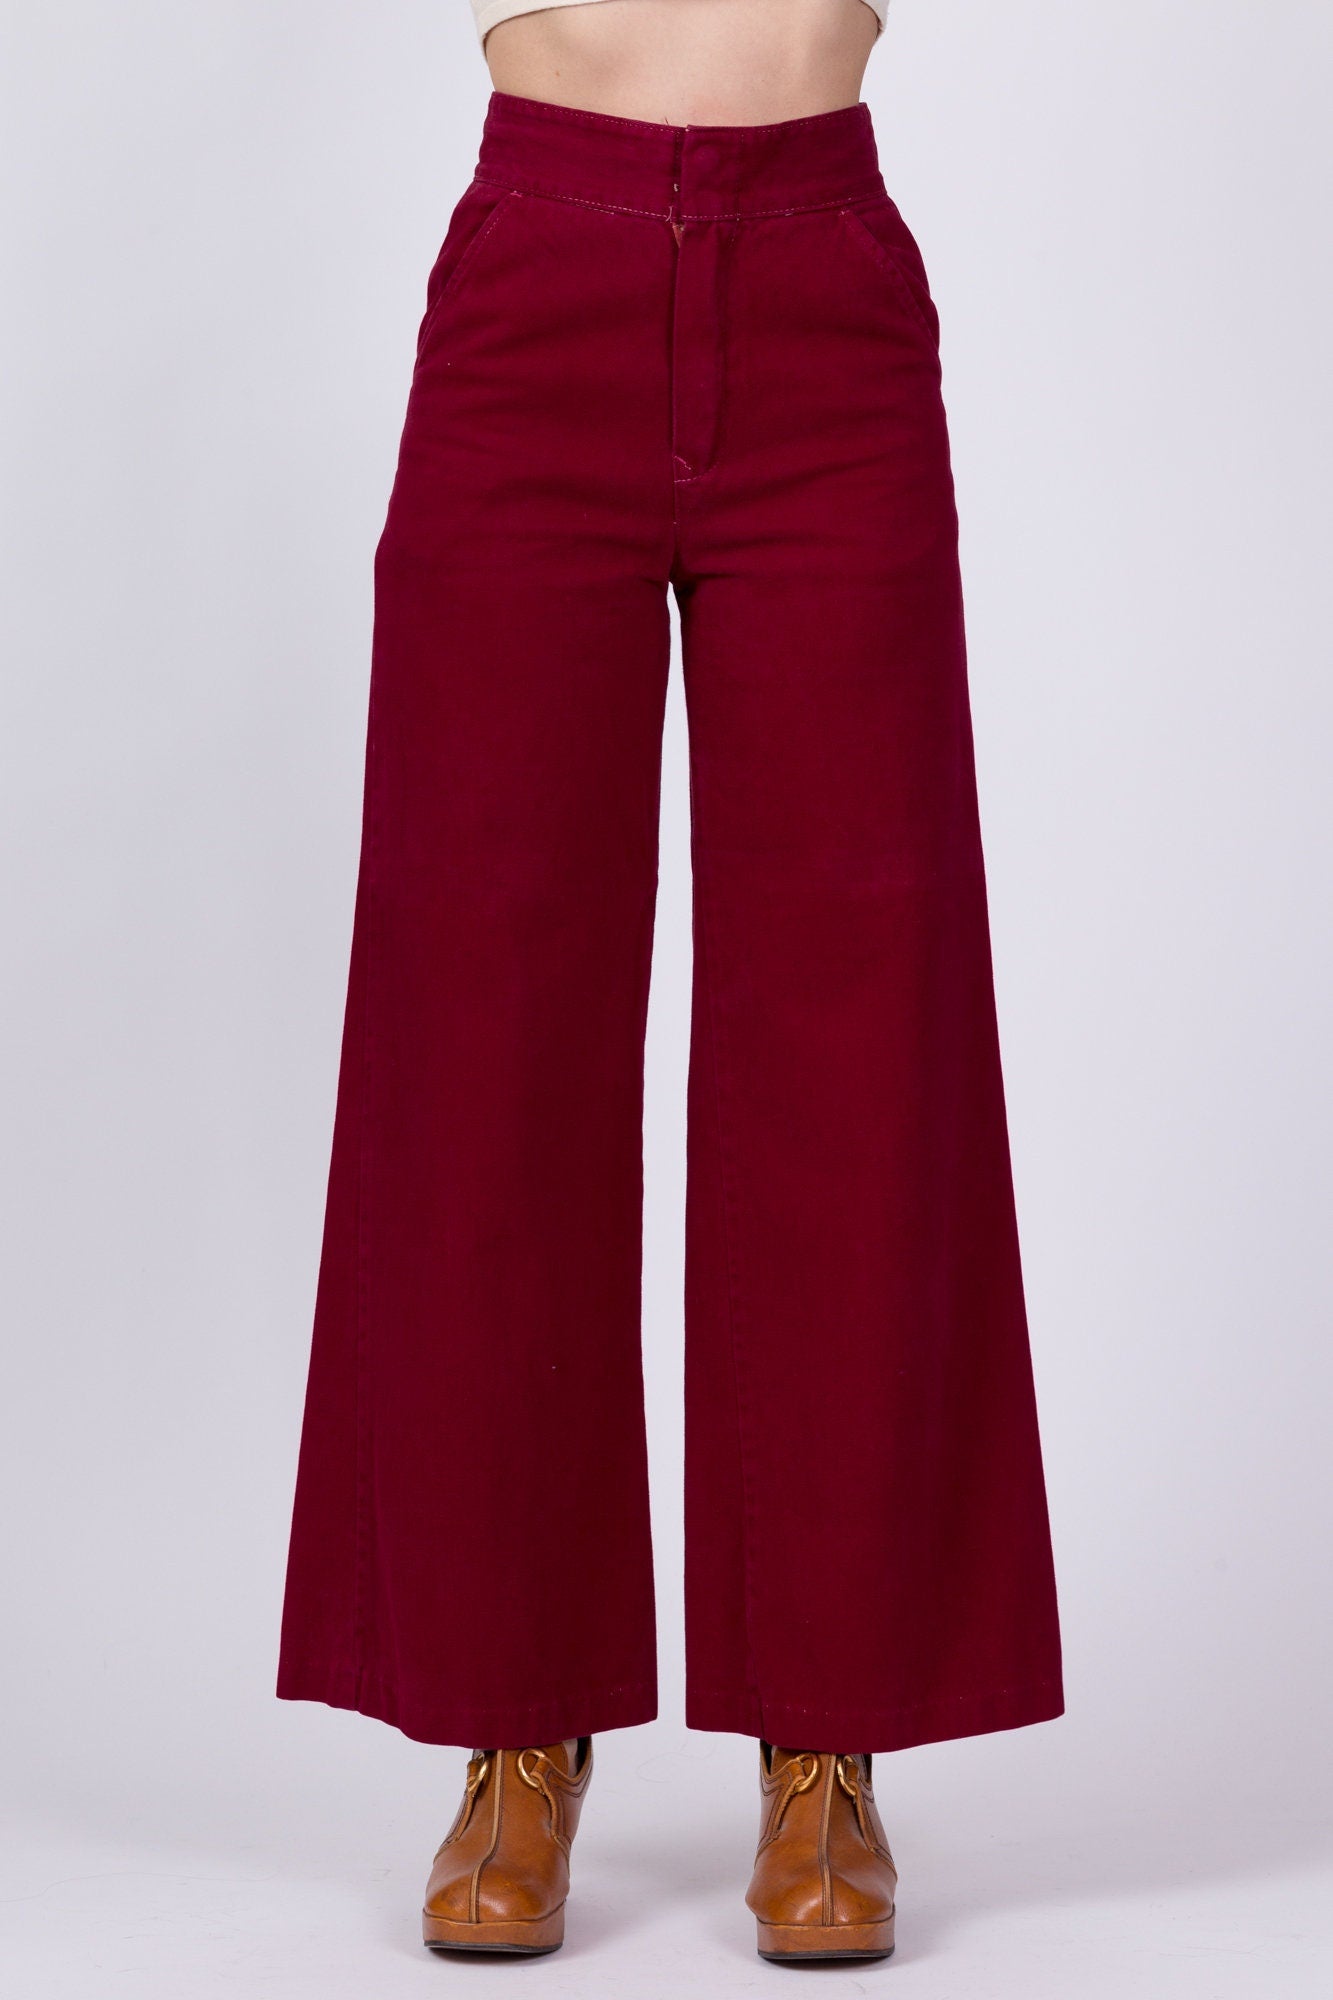 70s Wine Red High Waist Flared Cotton Twill Pants - Extra Small, 23" 